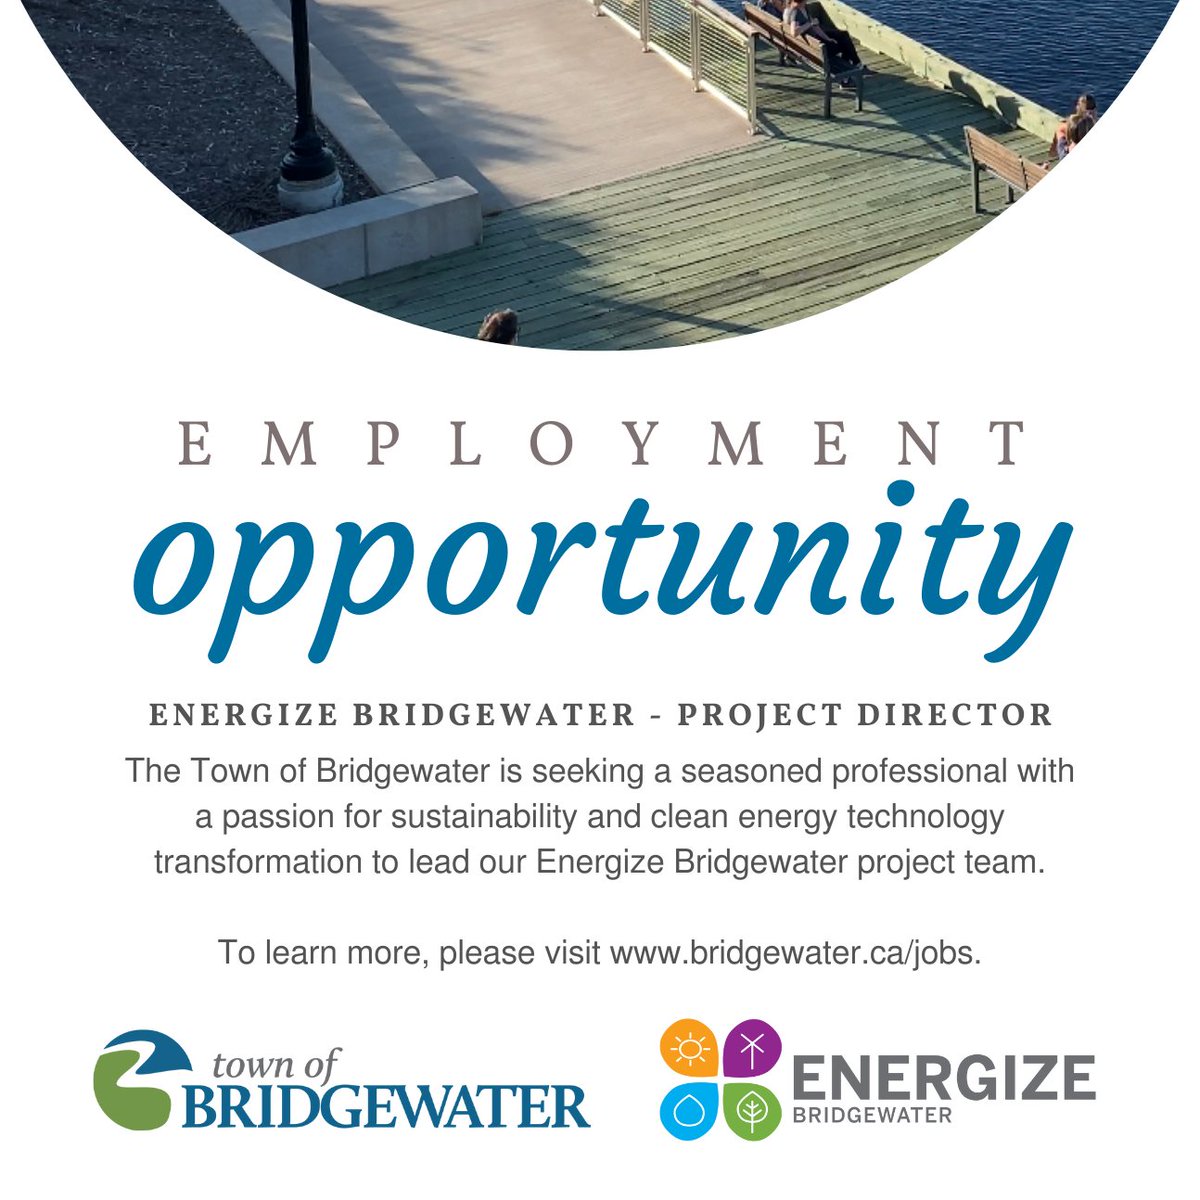 We're looking to hire an experienced professional with a passion for sustainability and transformative clean energy technology as our Energize Bridgewater Project Director! For full posting details, please visit bridgewater.ca/jobs! #workwithus #awesomeBridgewater